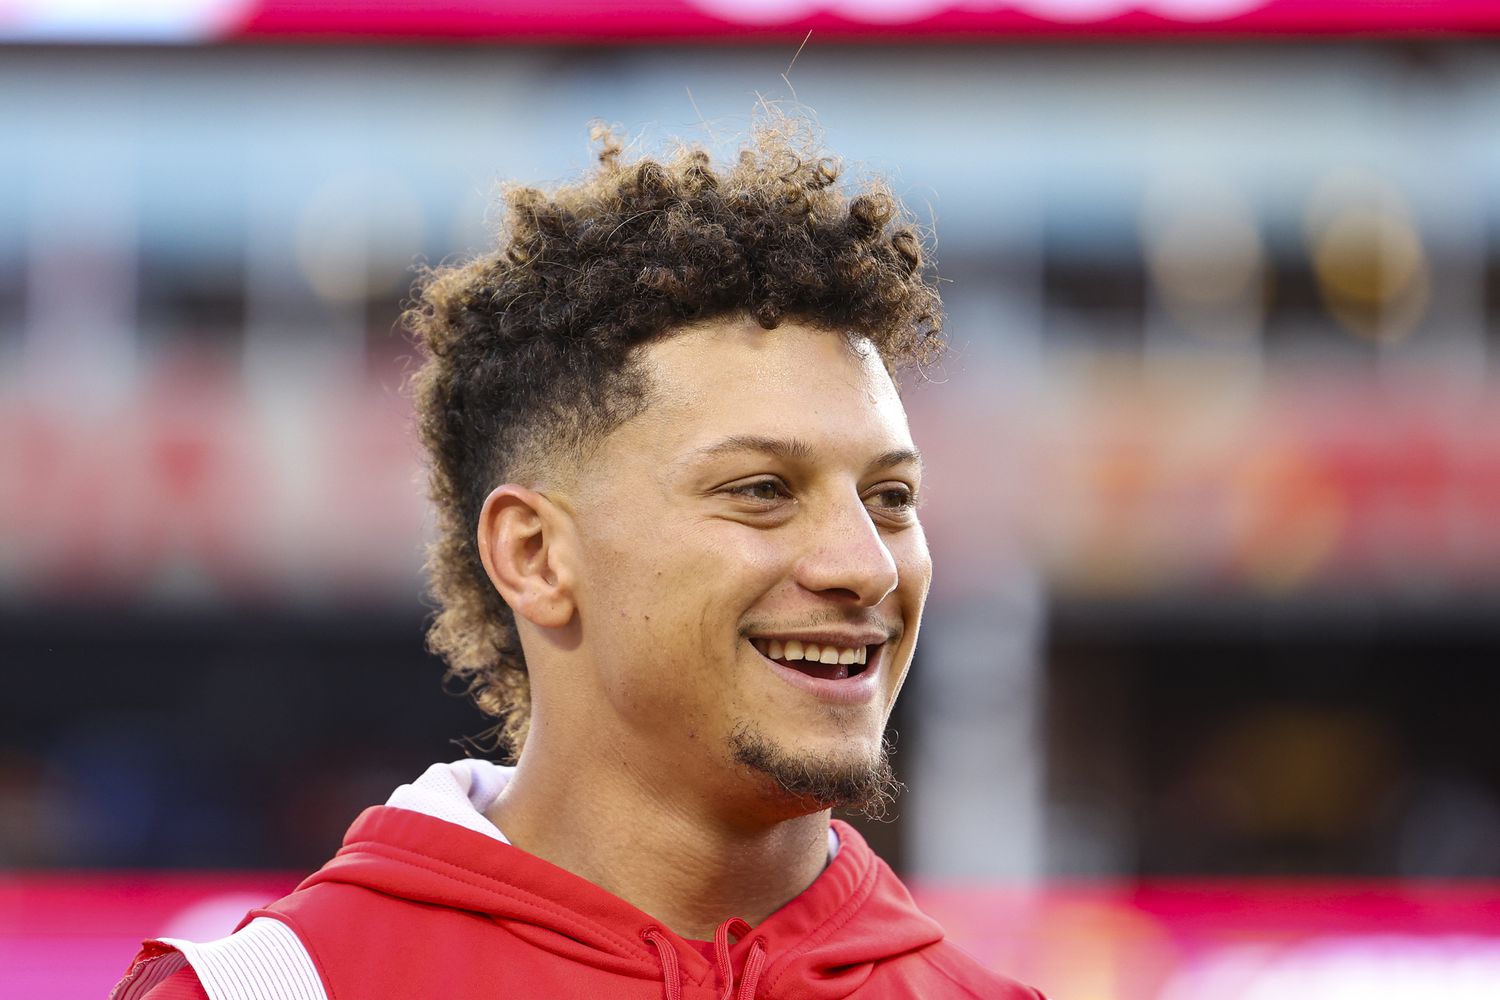 Chaos at the Mall The Patrick Mahomes Doppelgänger Incident